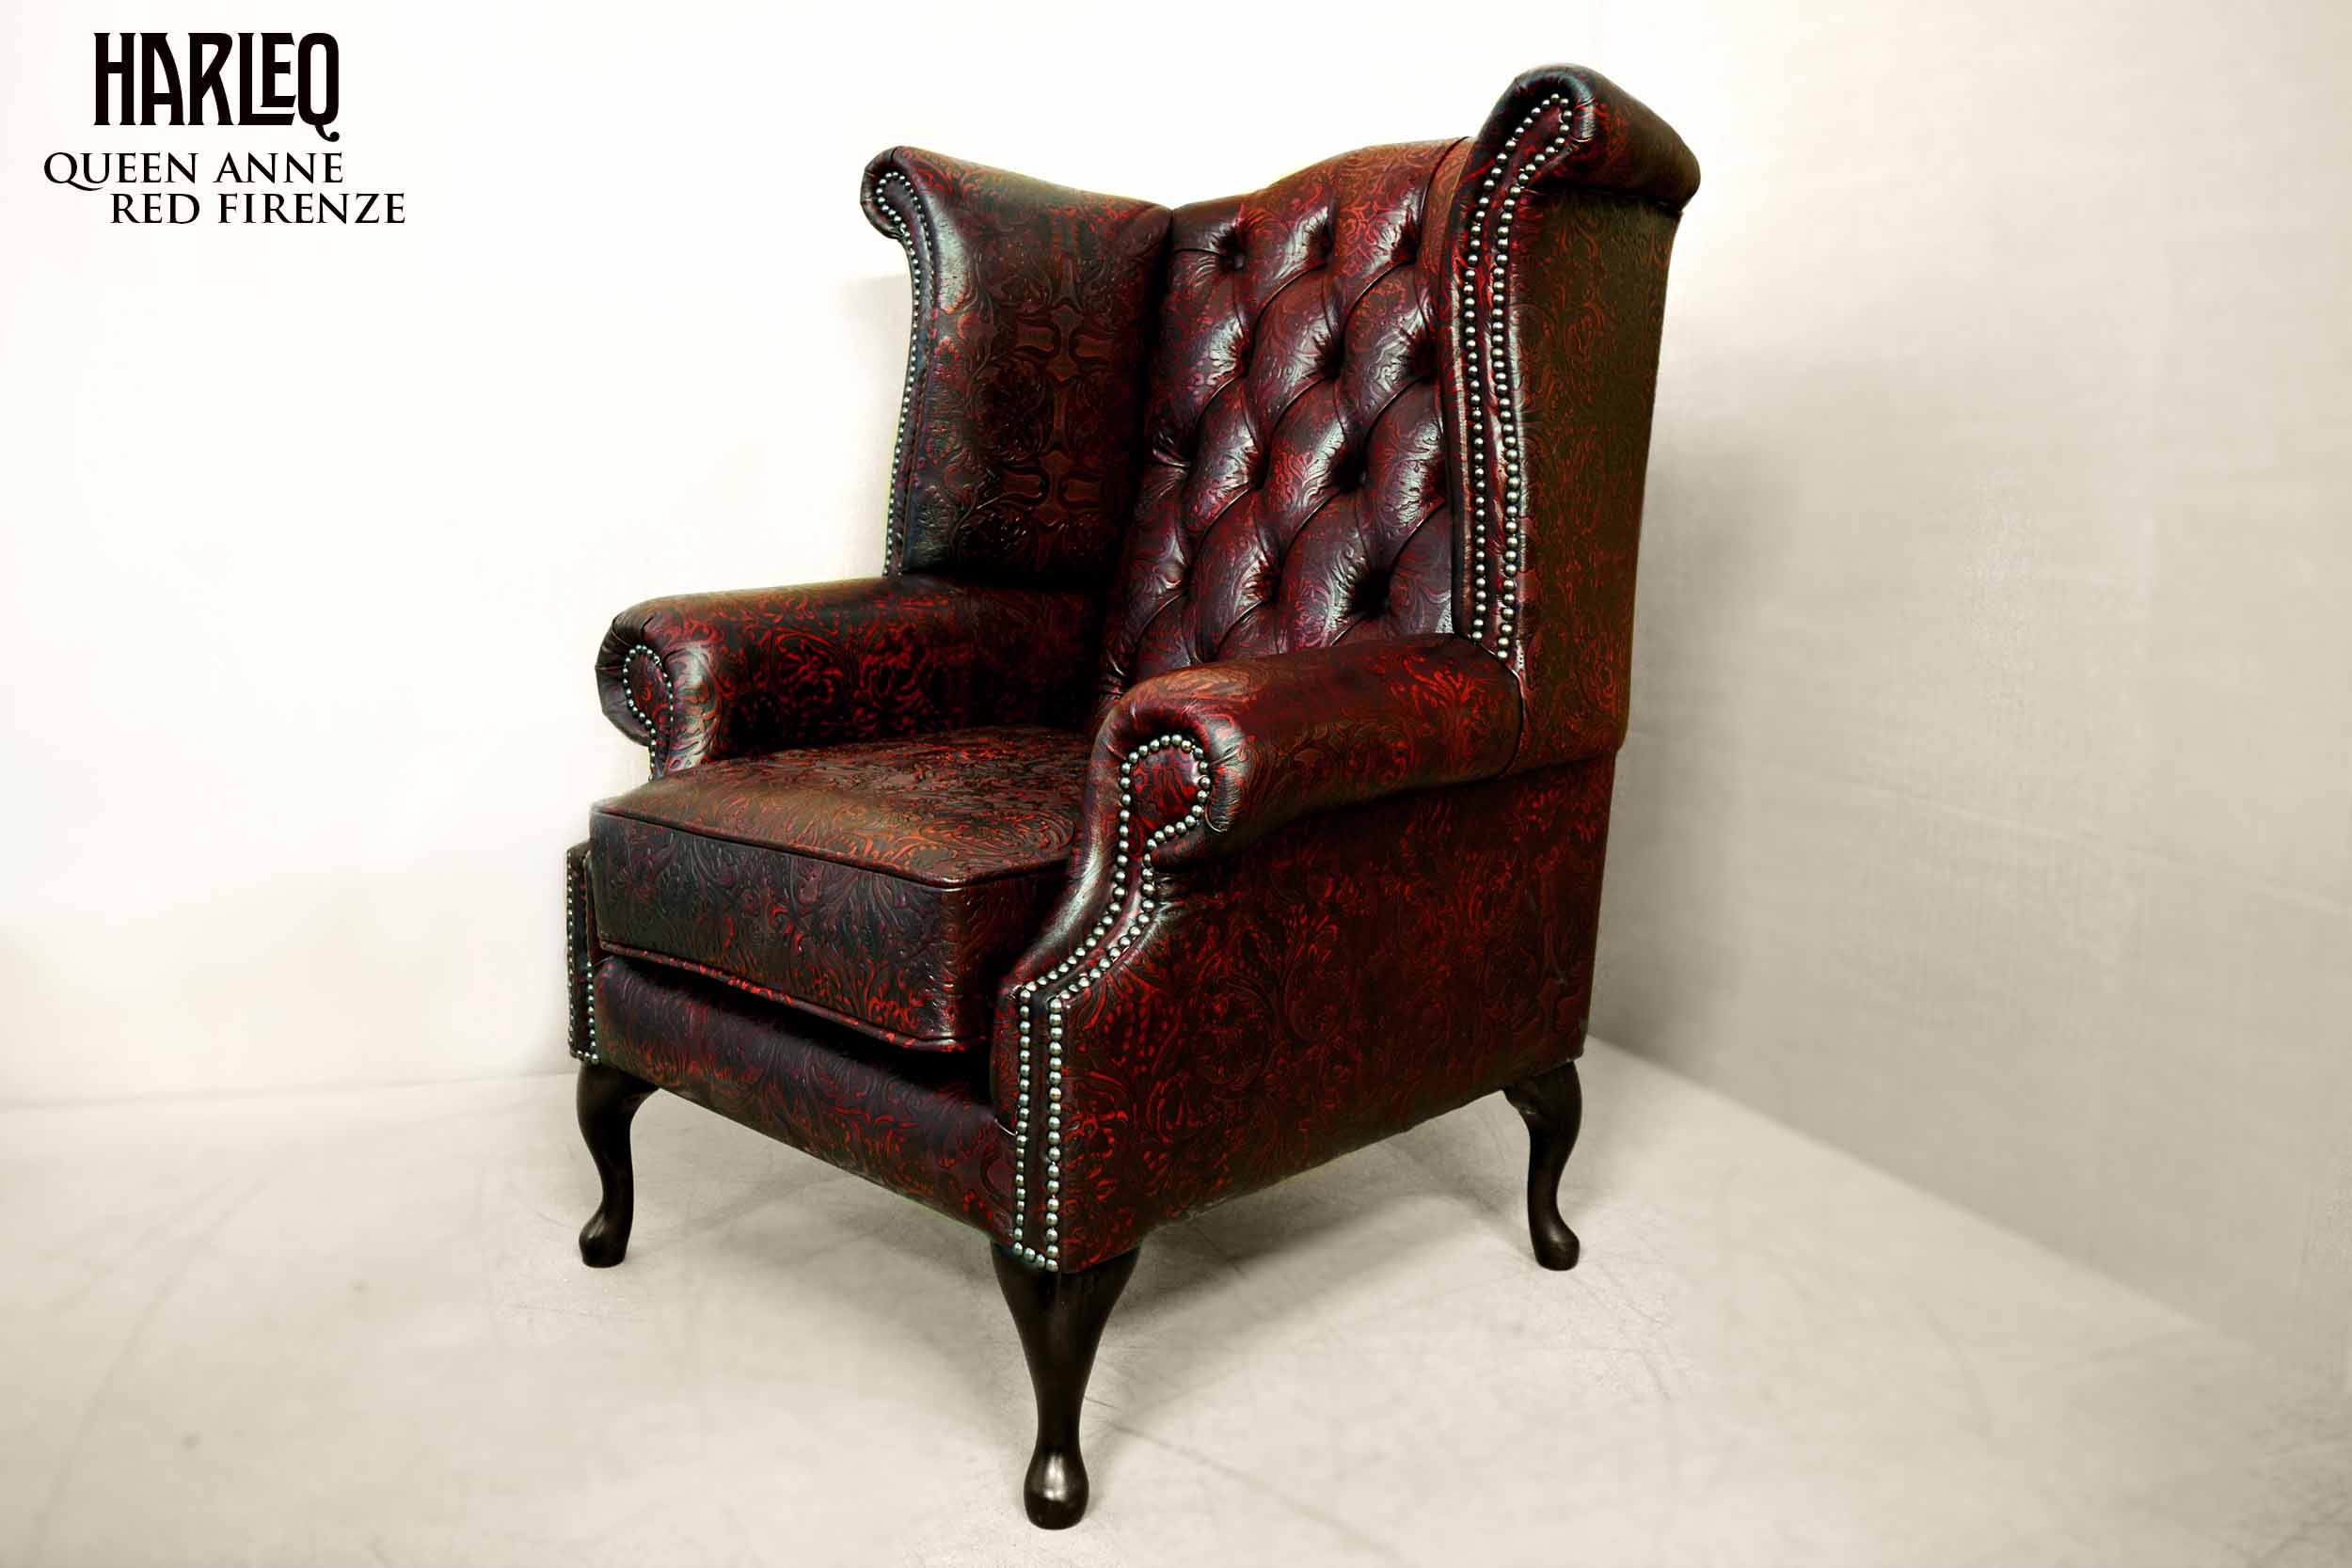 chair-queen-anne-chesterfield-luxury-leather-burgundy-florence